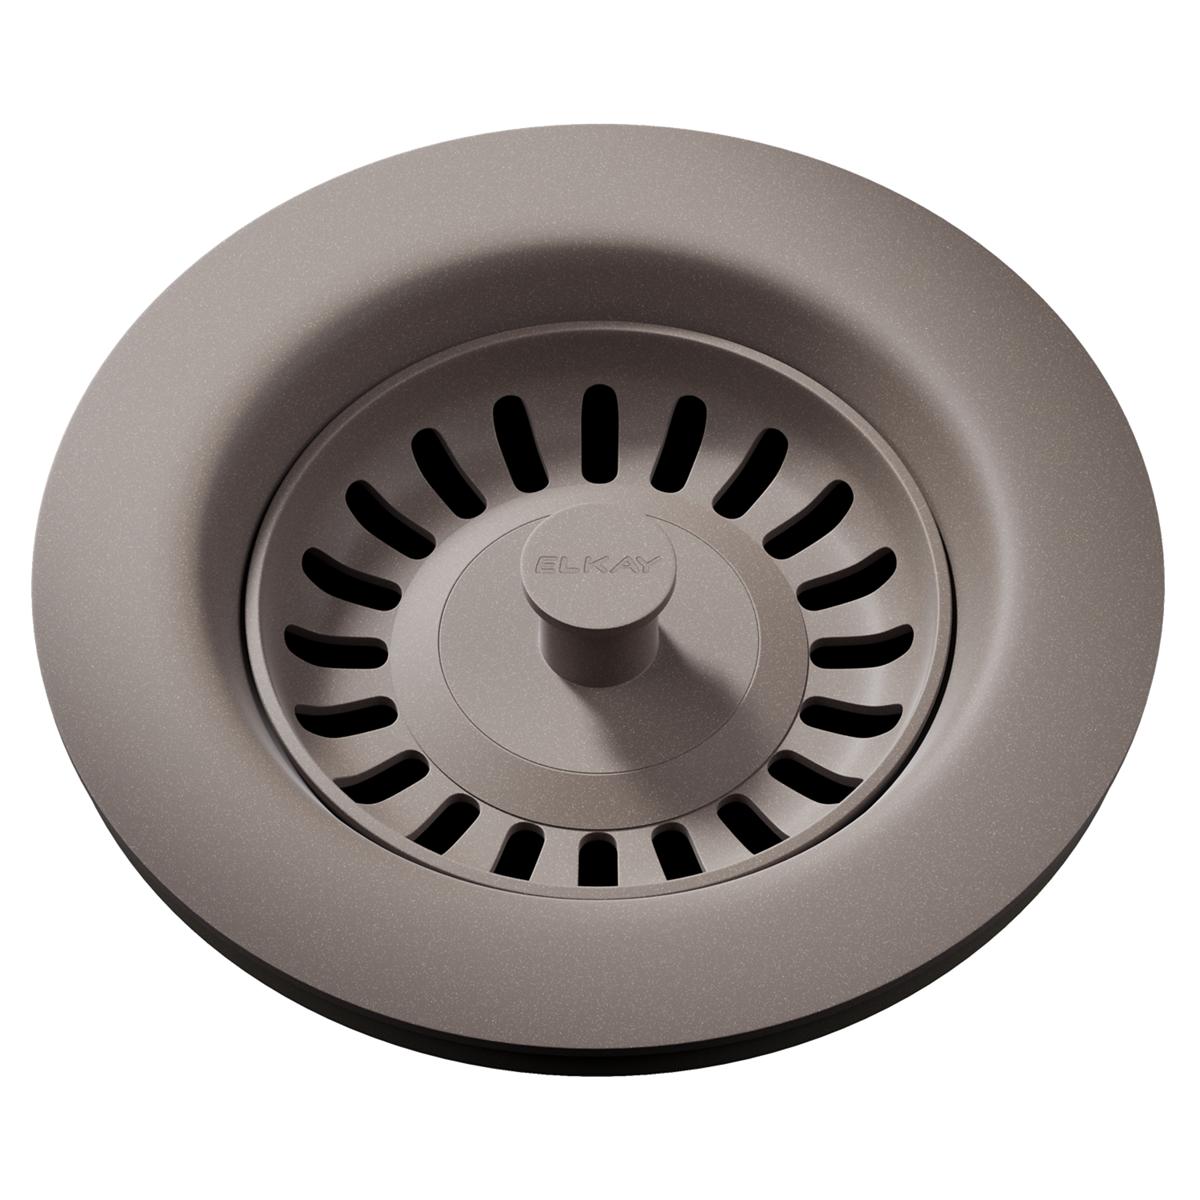 Elkay Polymer Drain Fitting with Removable Basket Strainer and Rubber Stopper